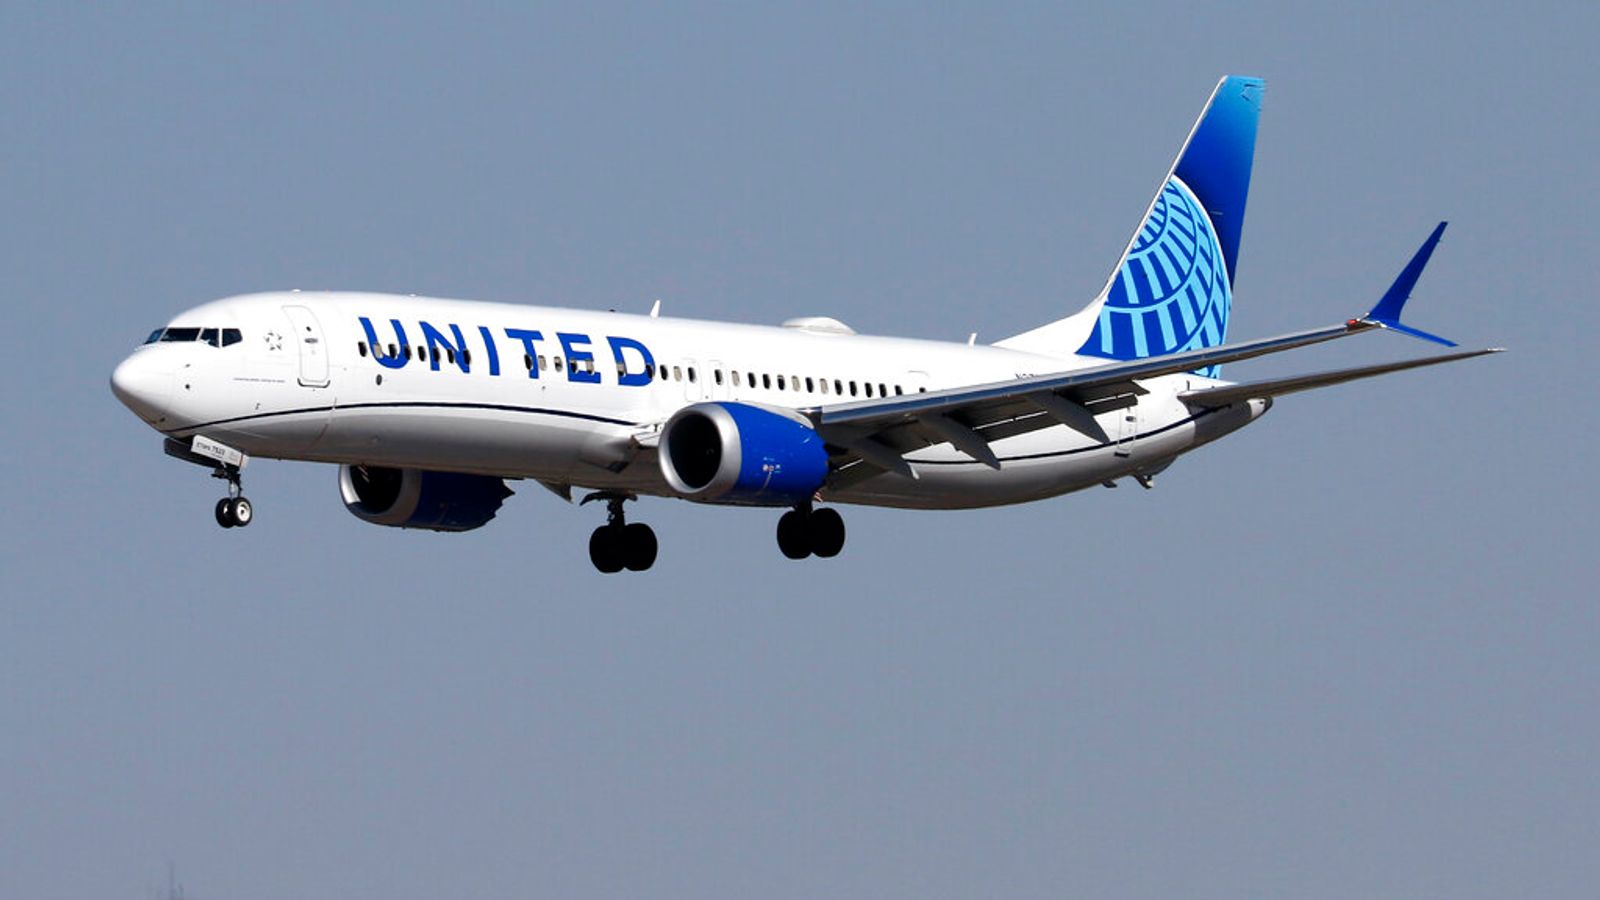 Loose bolts found on United Airlines 737 Max 9 aircraft during inspections